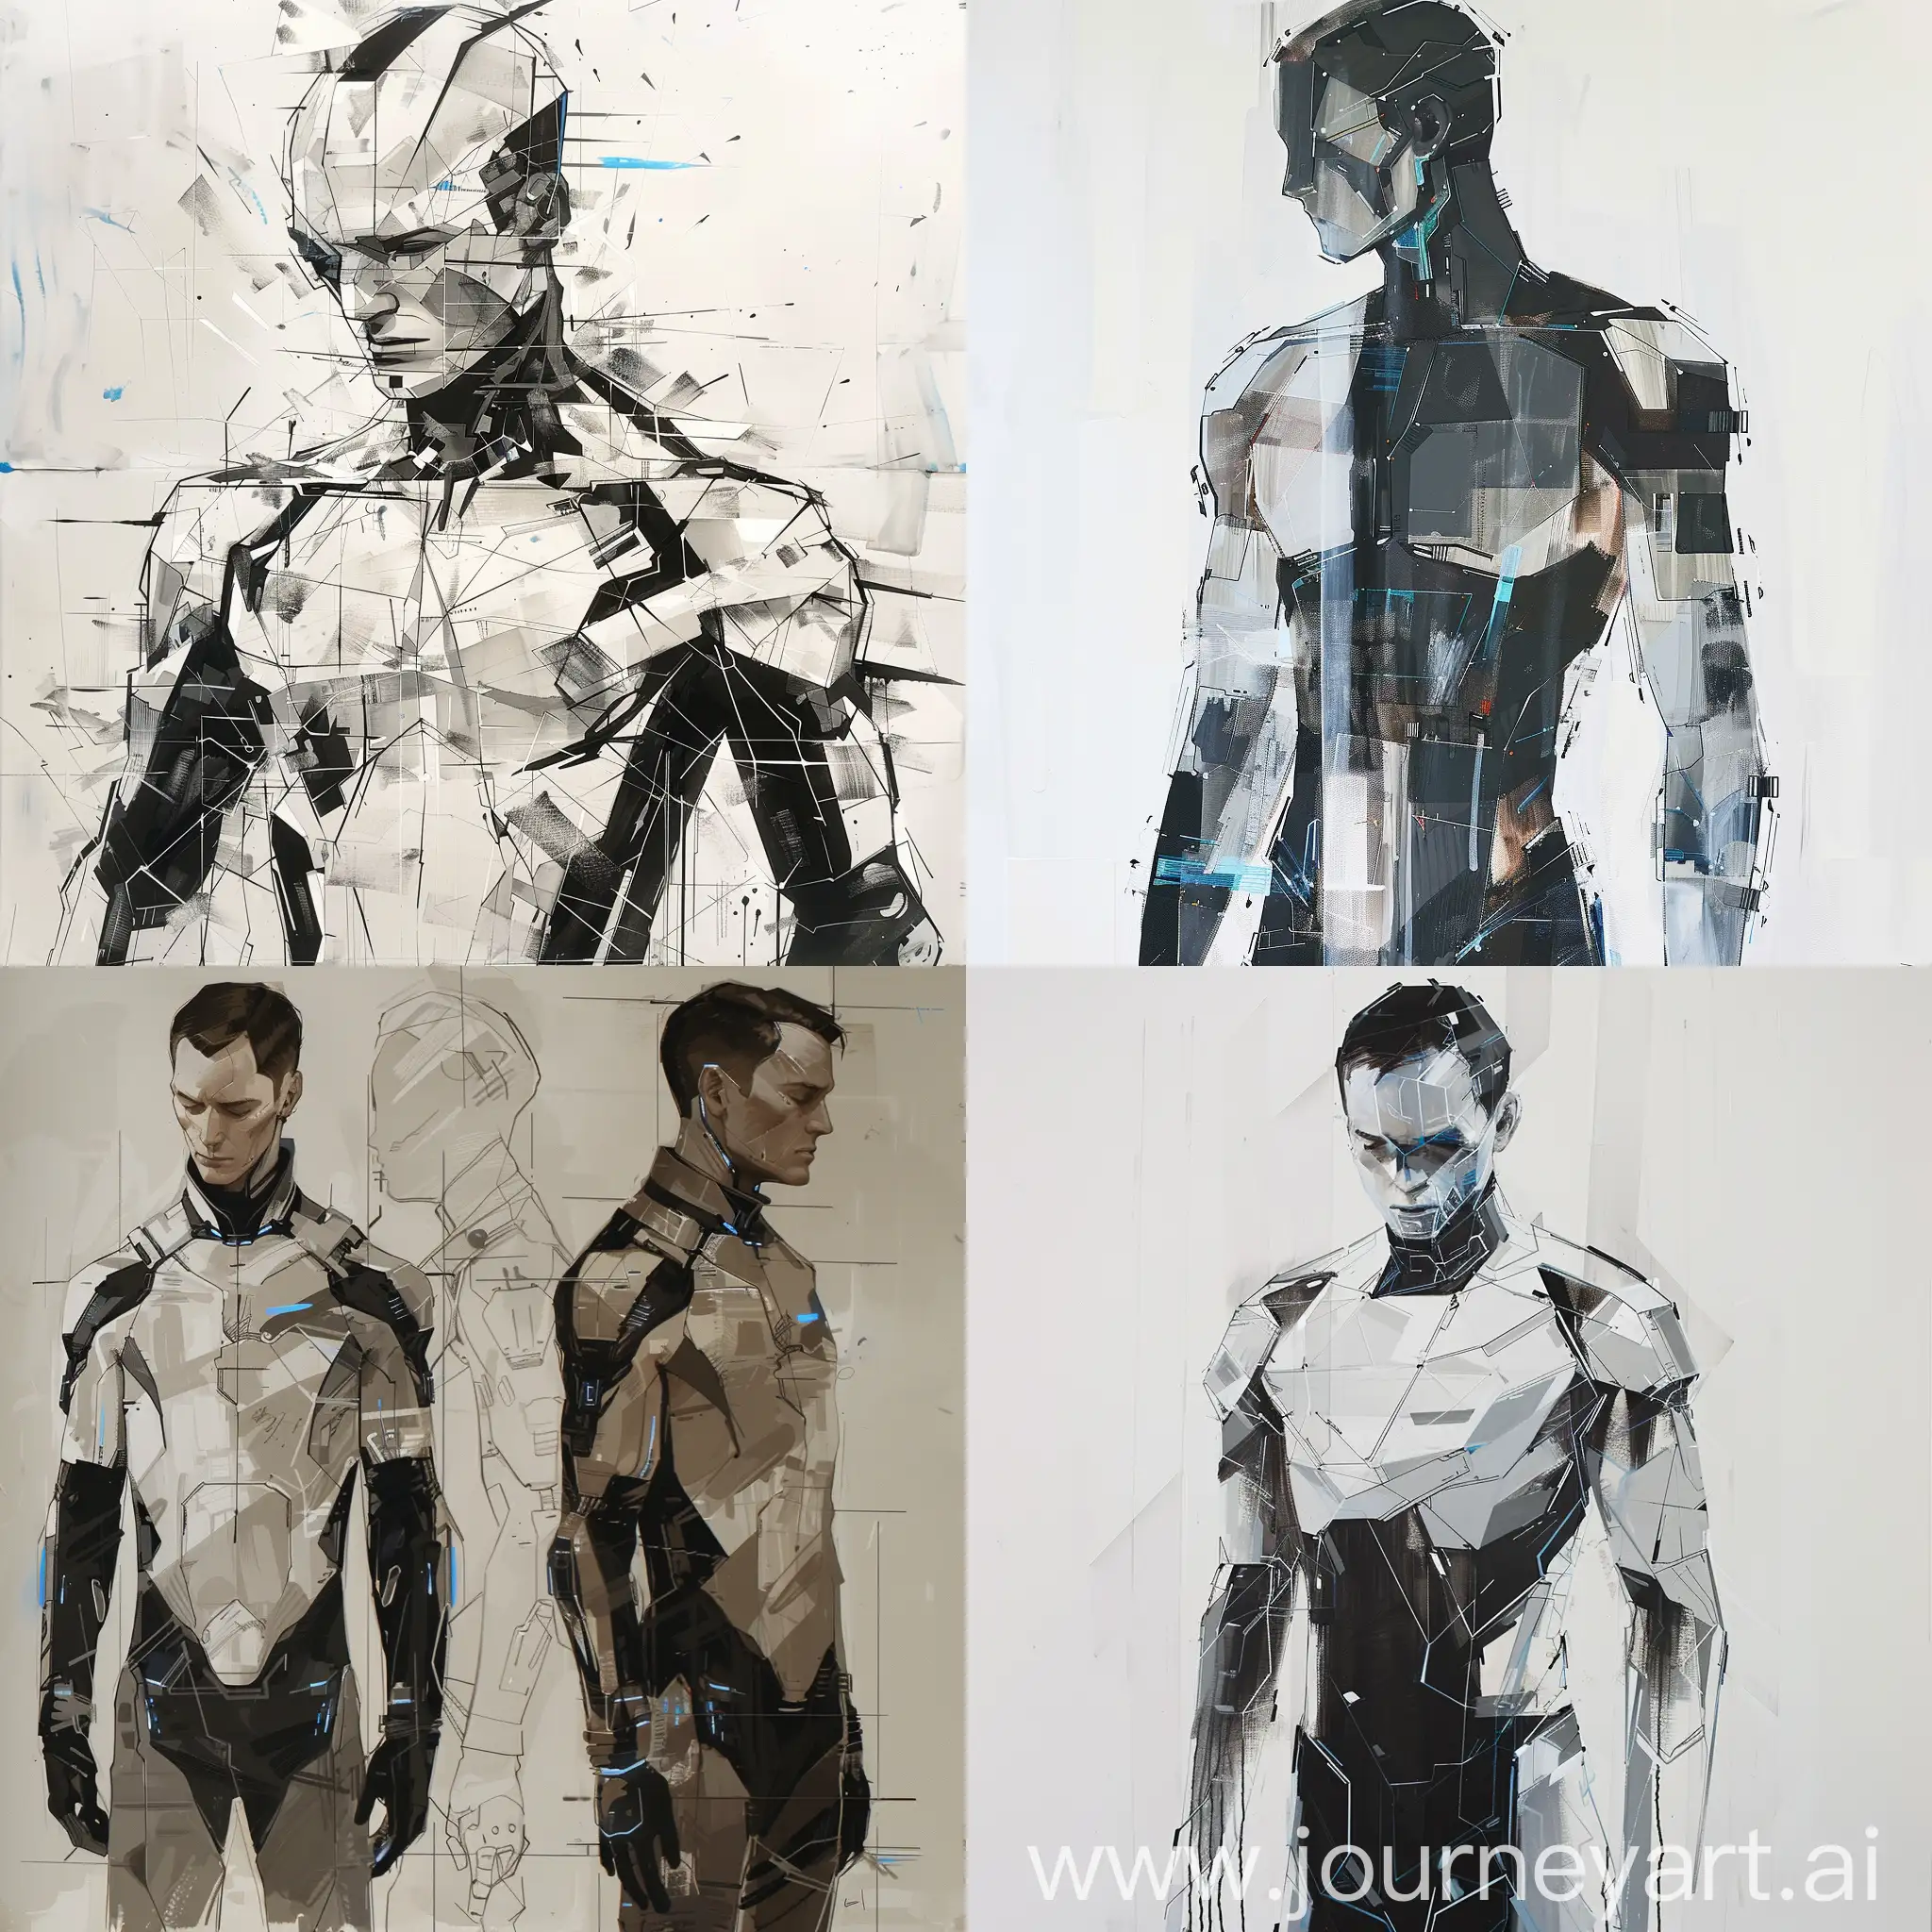 Futuristic-Android-Sketches-Abstract-Geometric-Designs-in-Detroit-Become-Human-Style